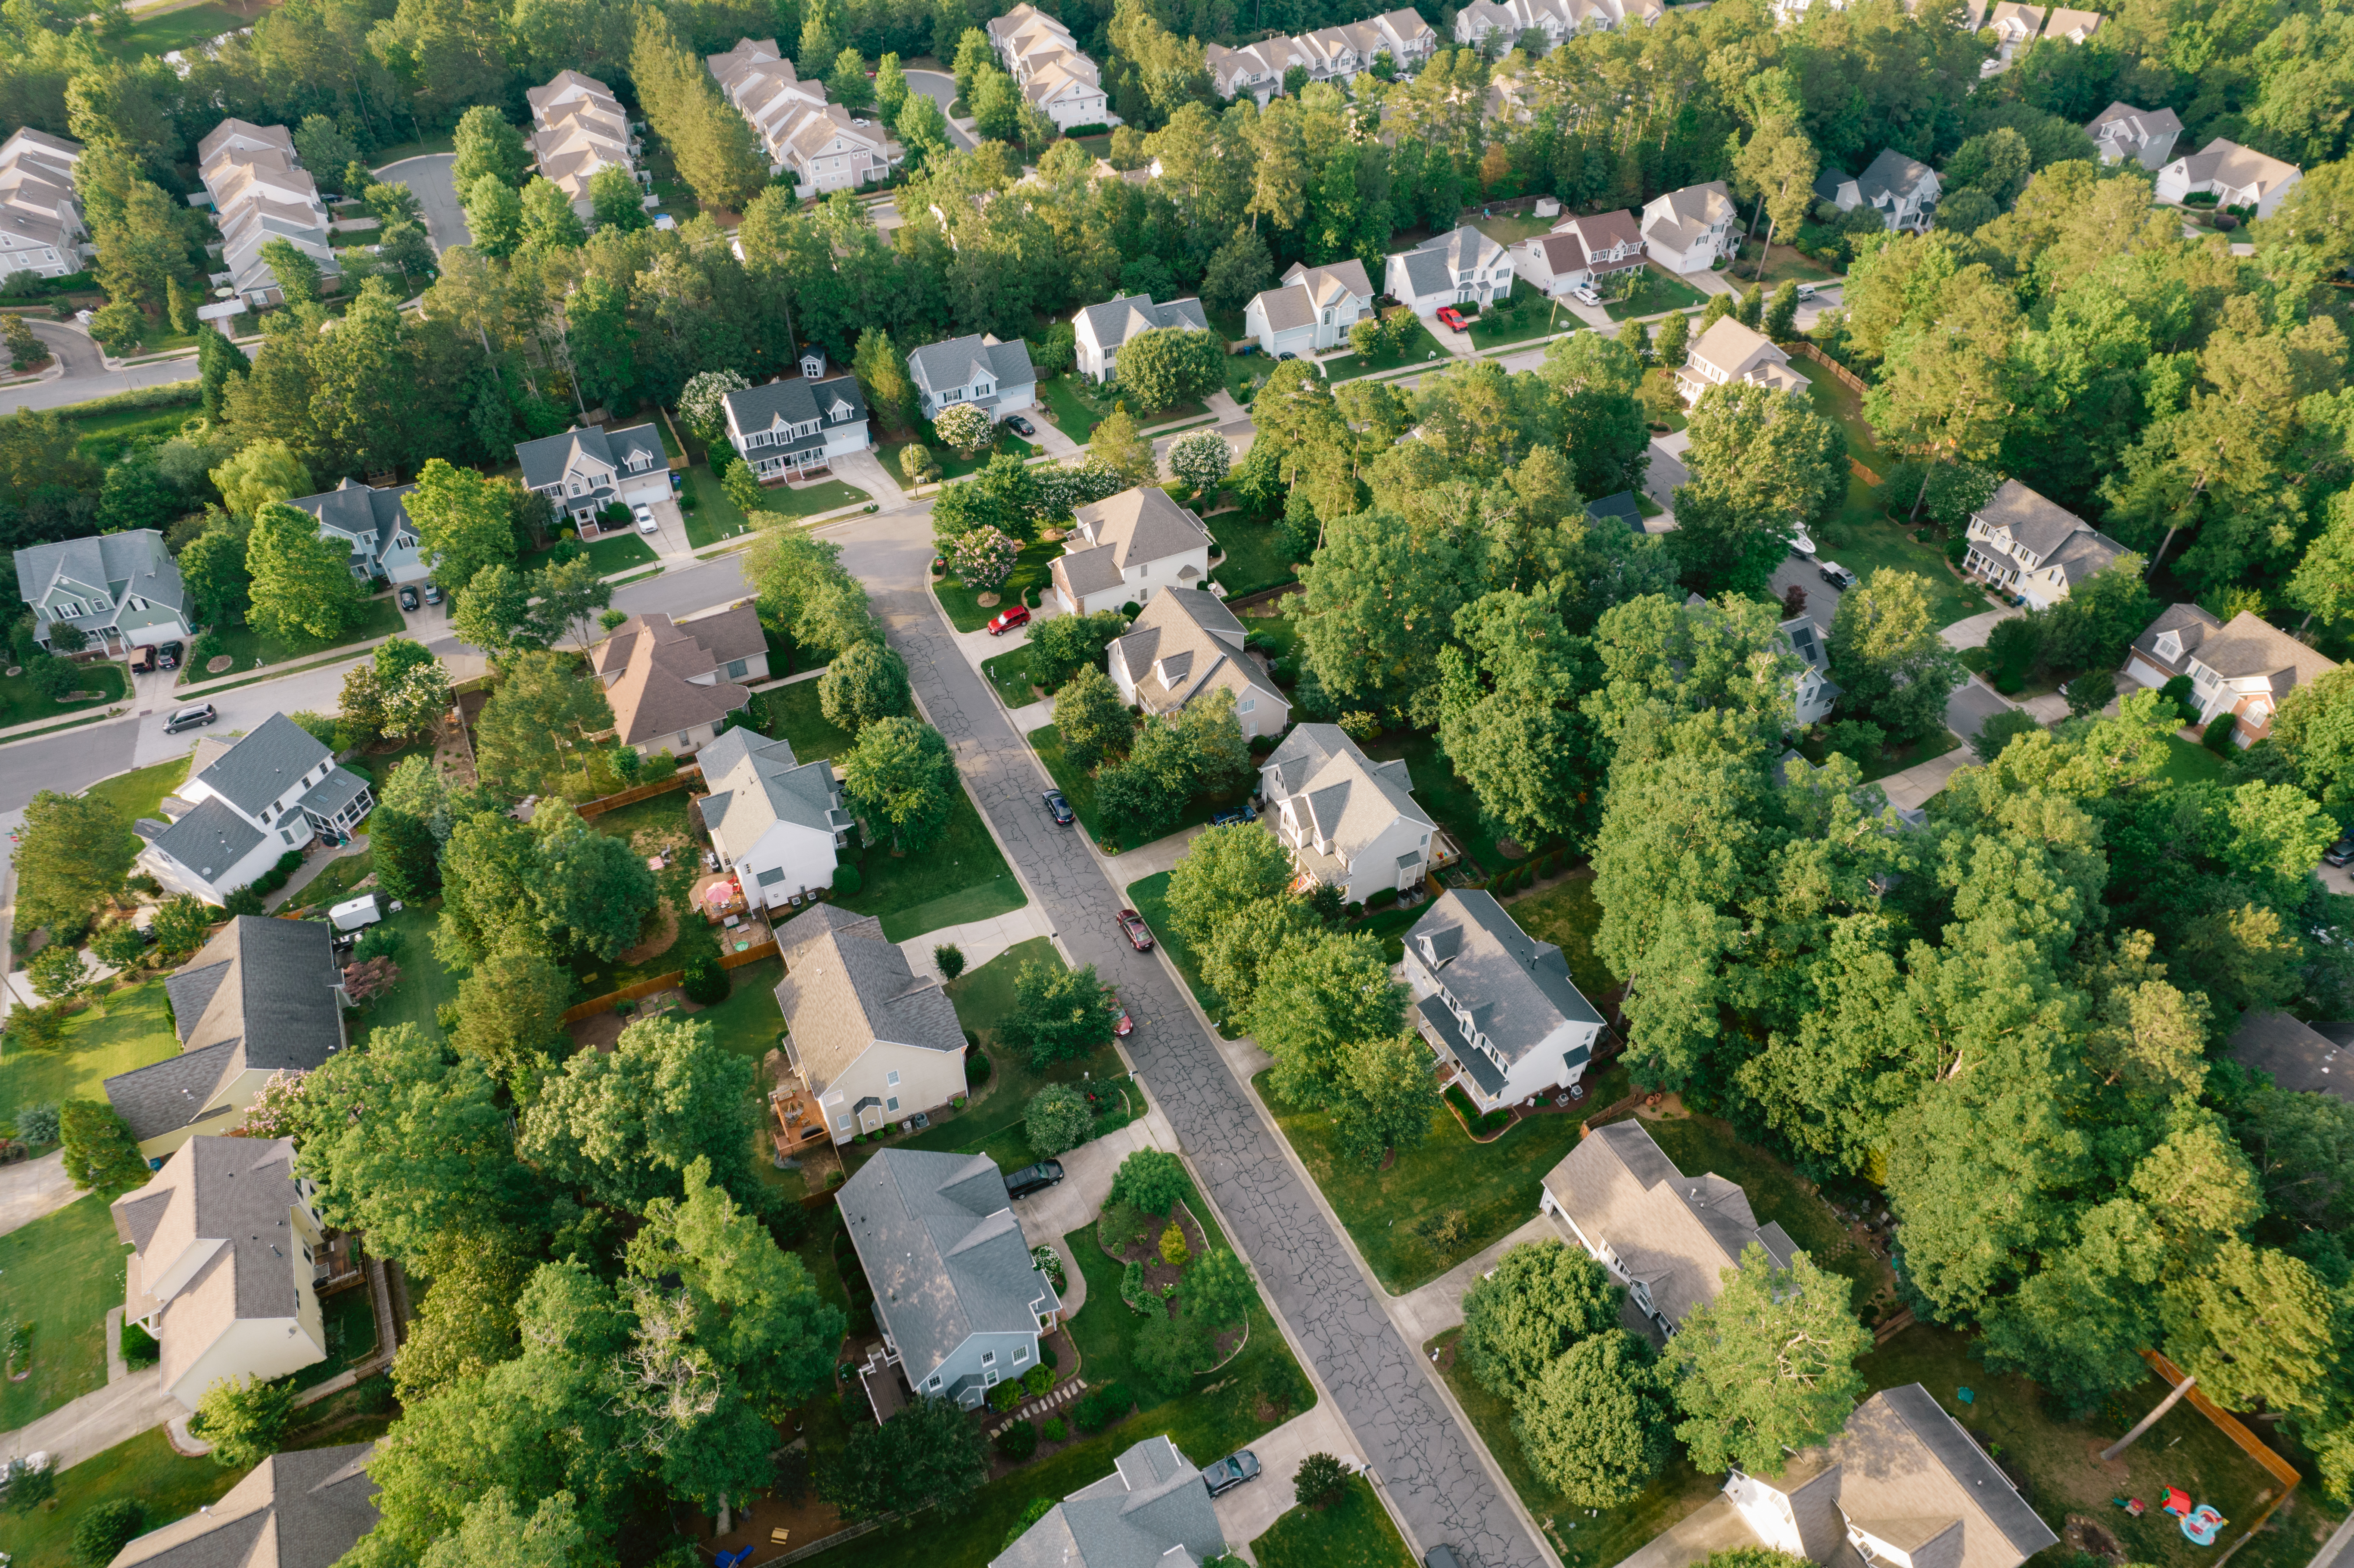 Aerial view of residential households in an American suburb